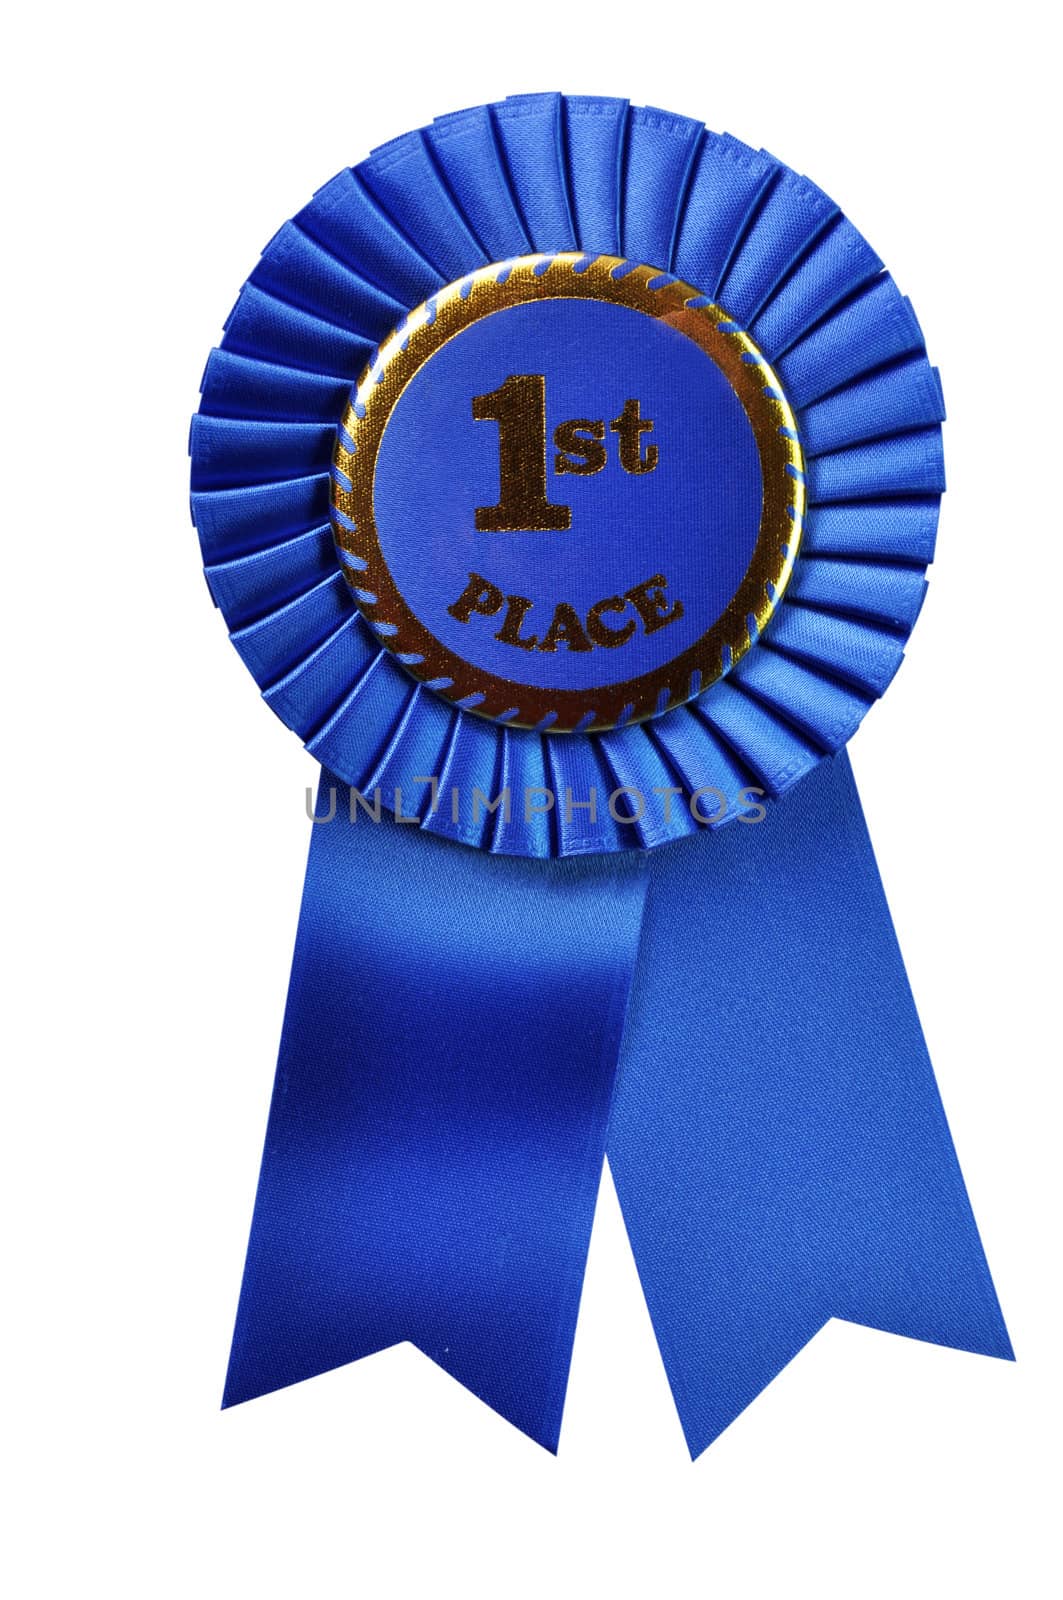 Blue ribbon award isolated on white background with clipping path.